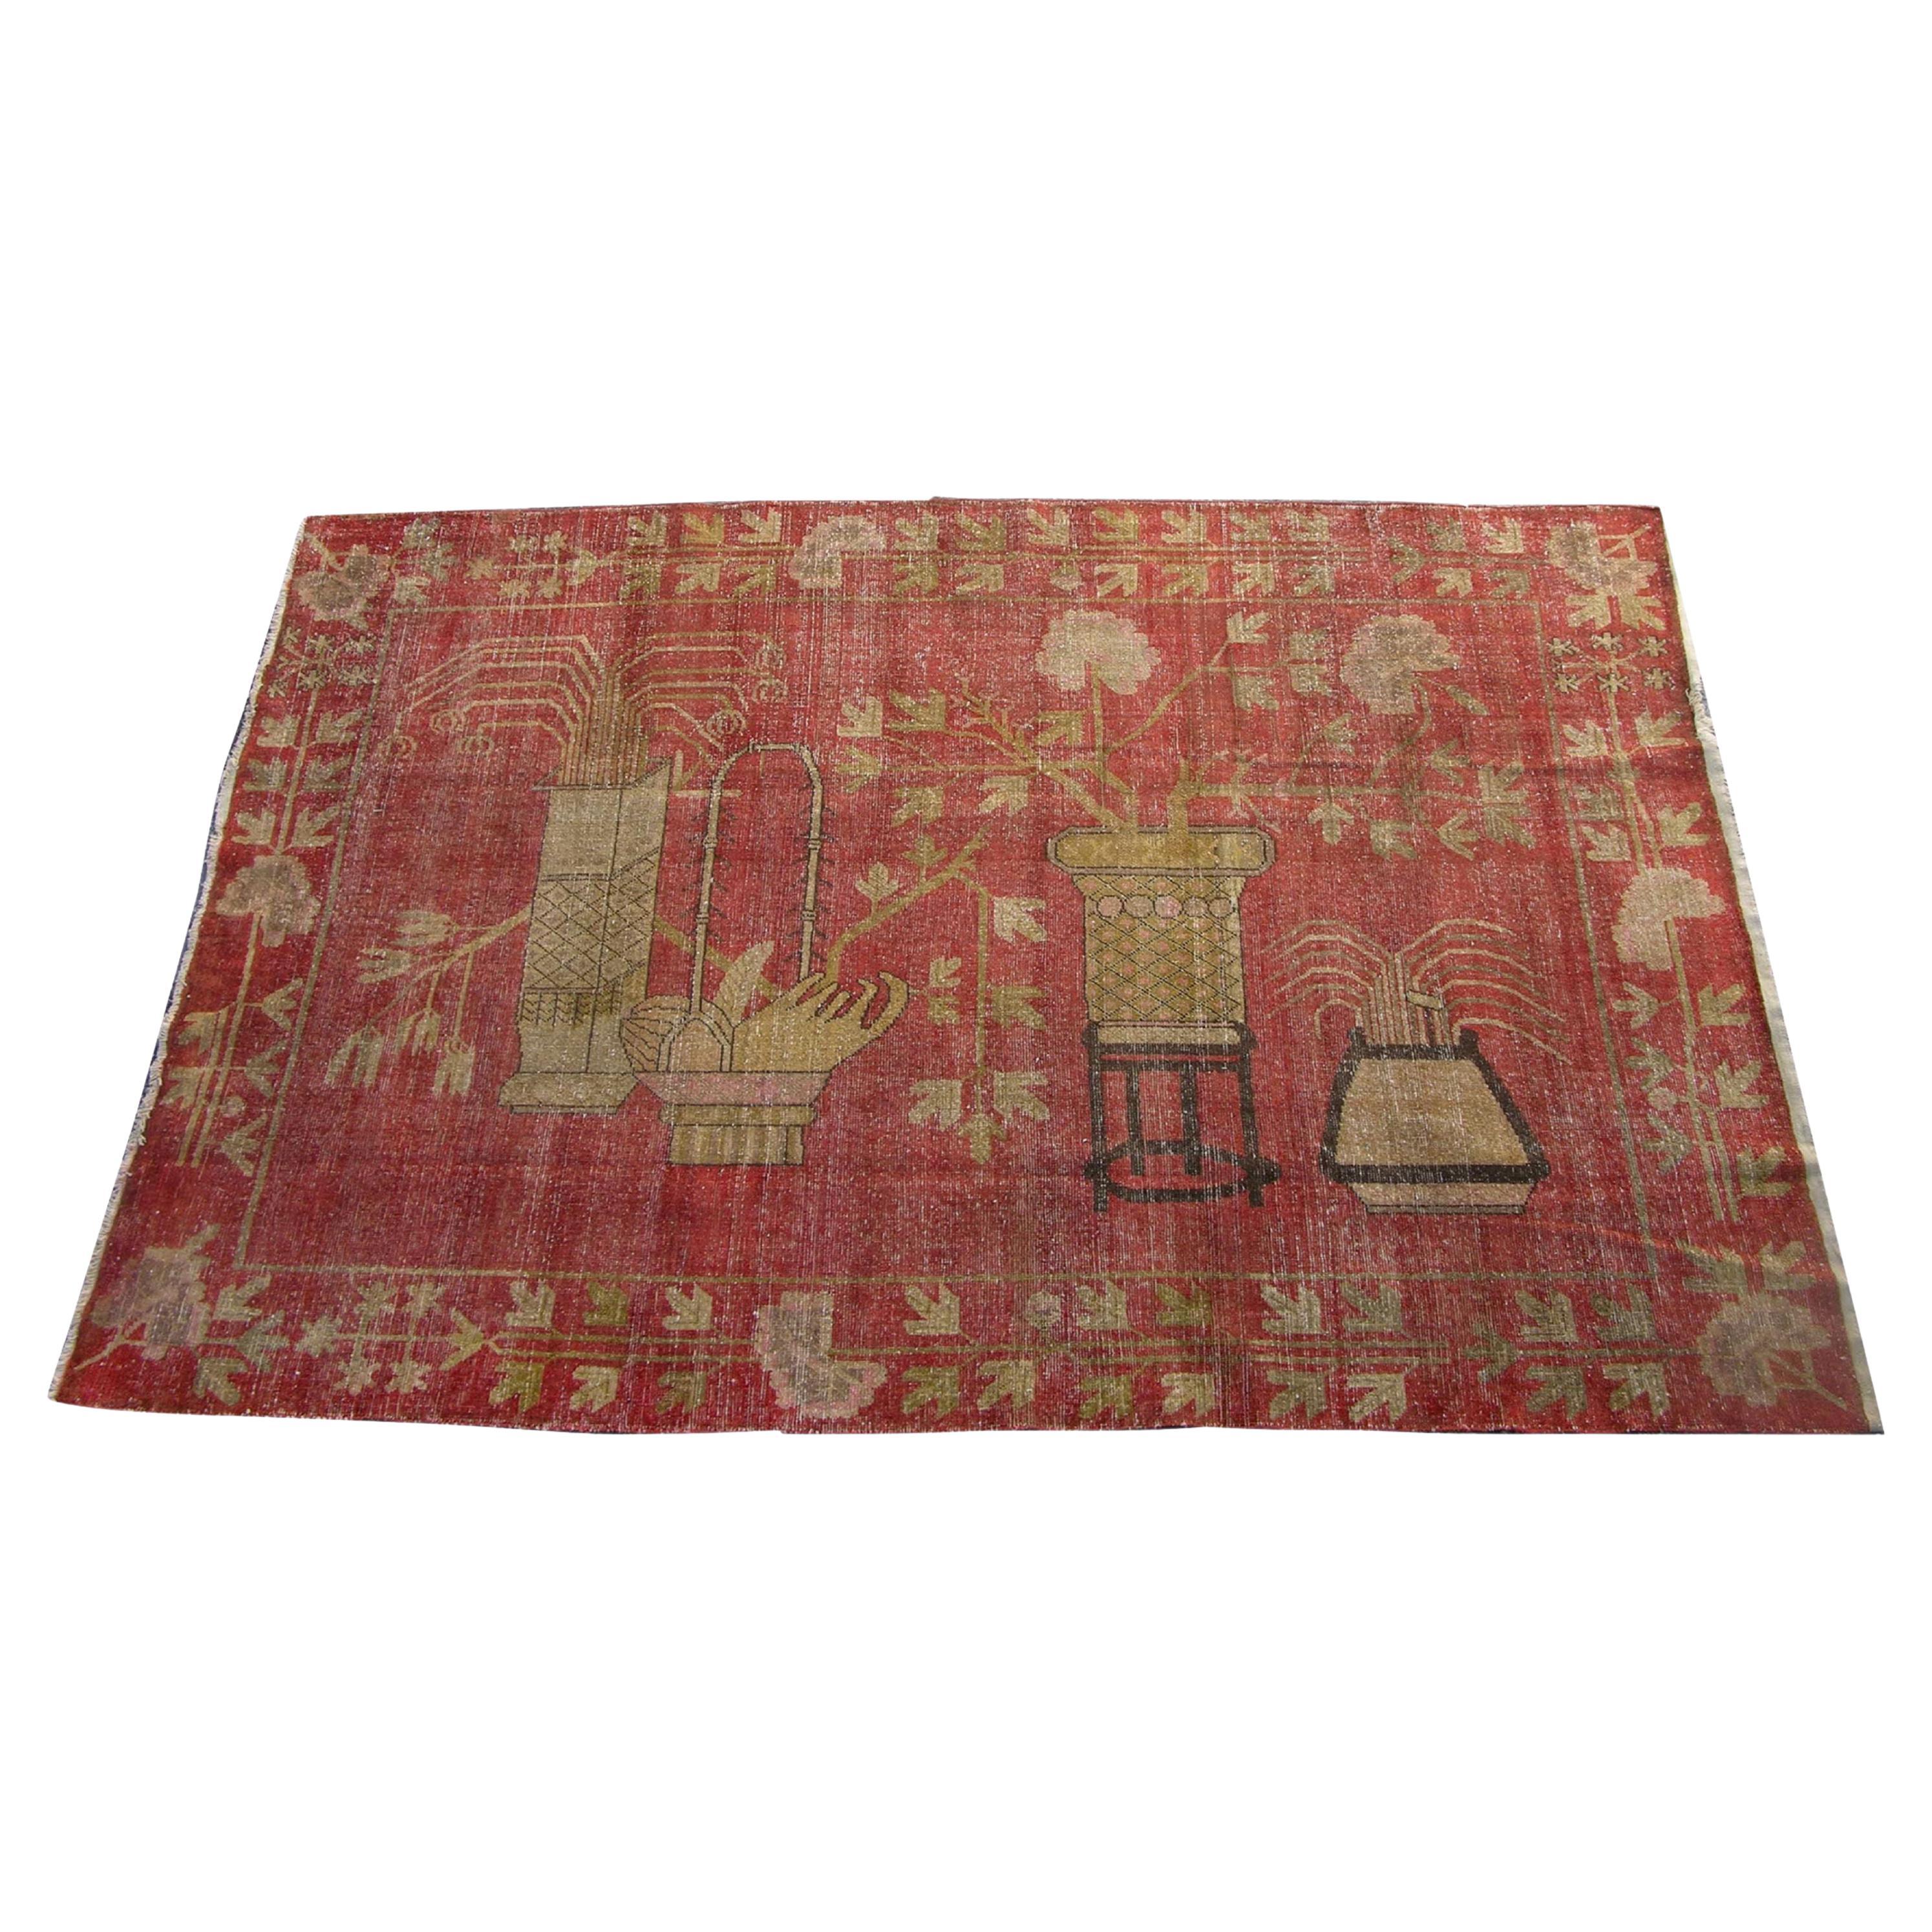 19th Century Authentic Oriental Samarkand Rug For Sale